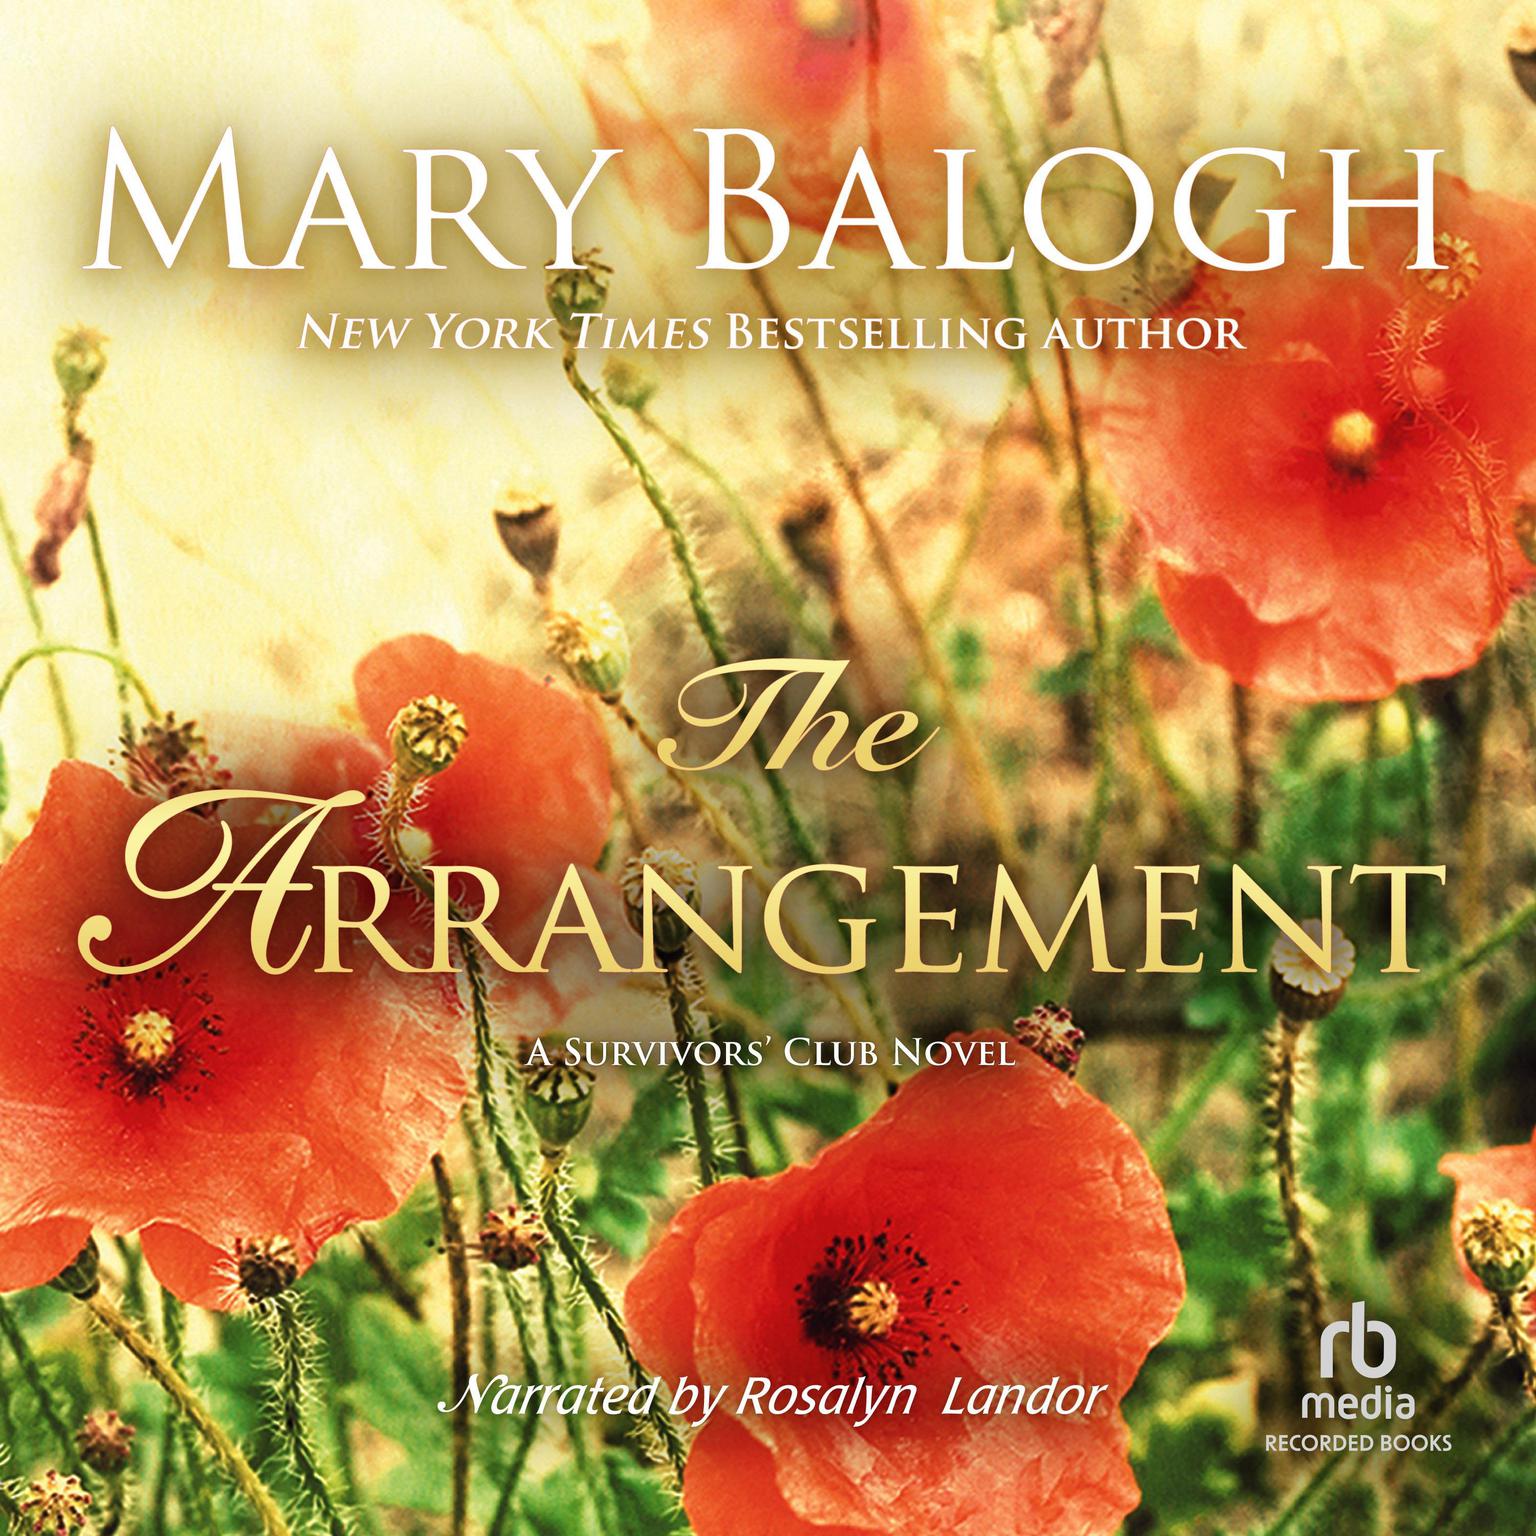 The Arrangement Audiobook, by Mary Balogh